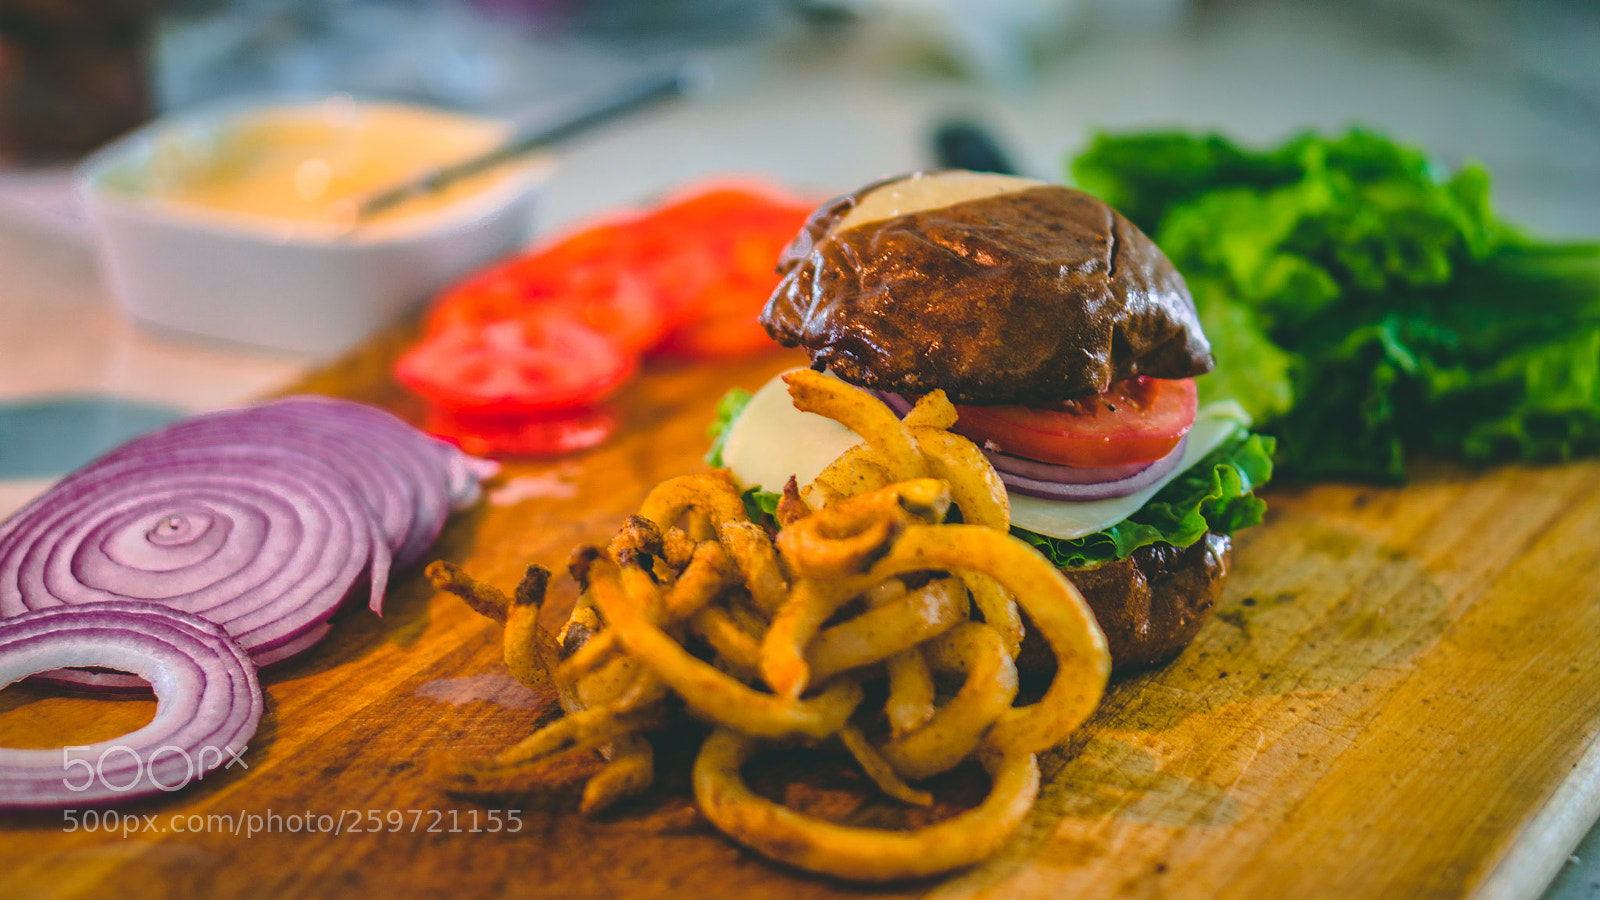 Sony a6300 sample photo. Burger time photography